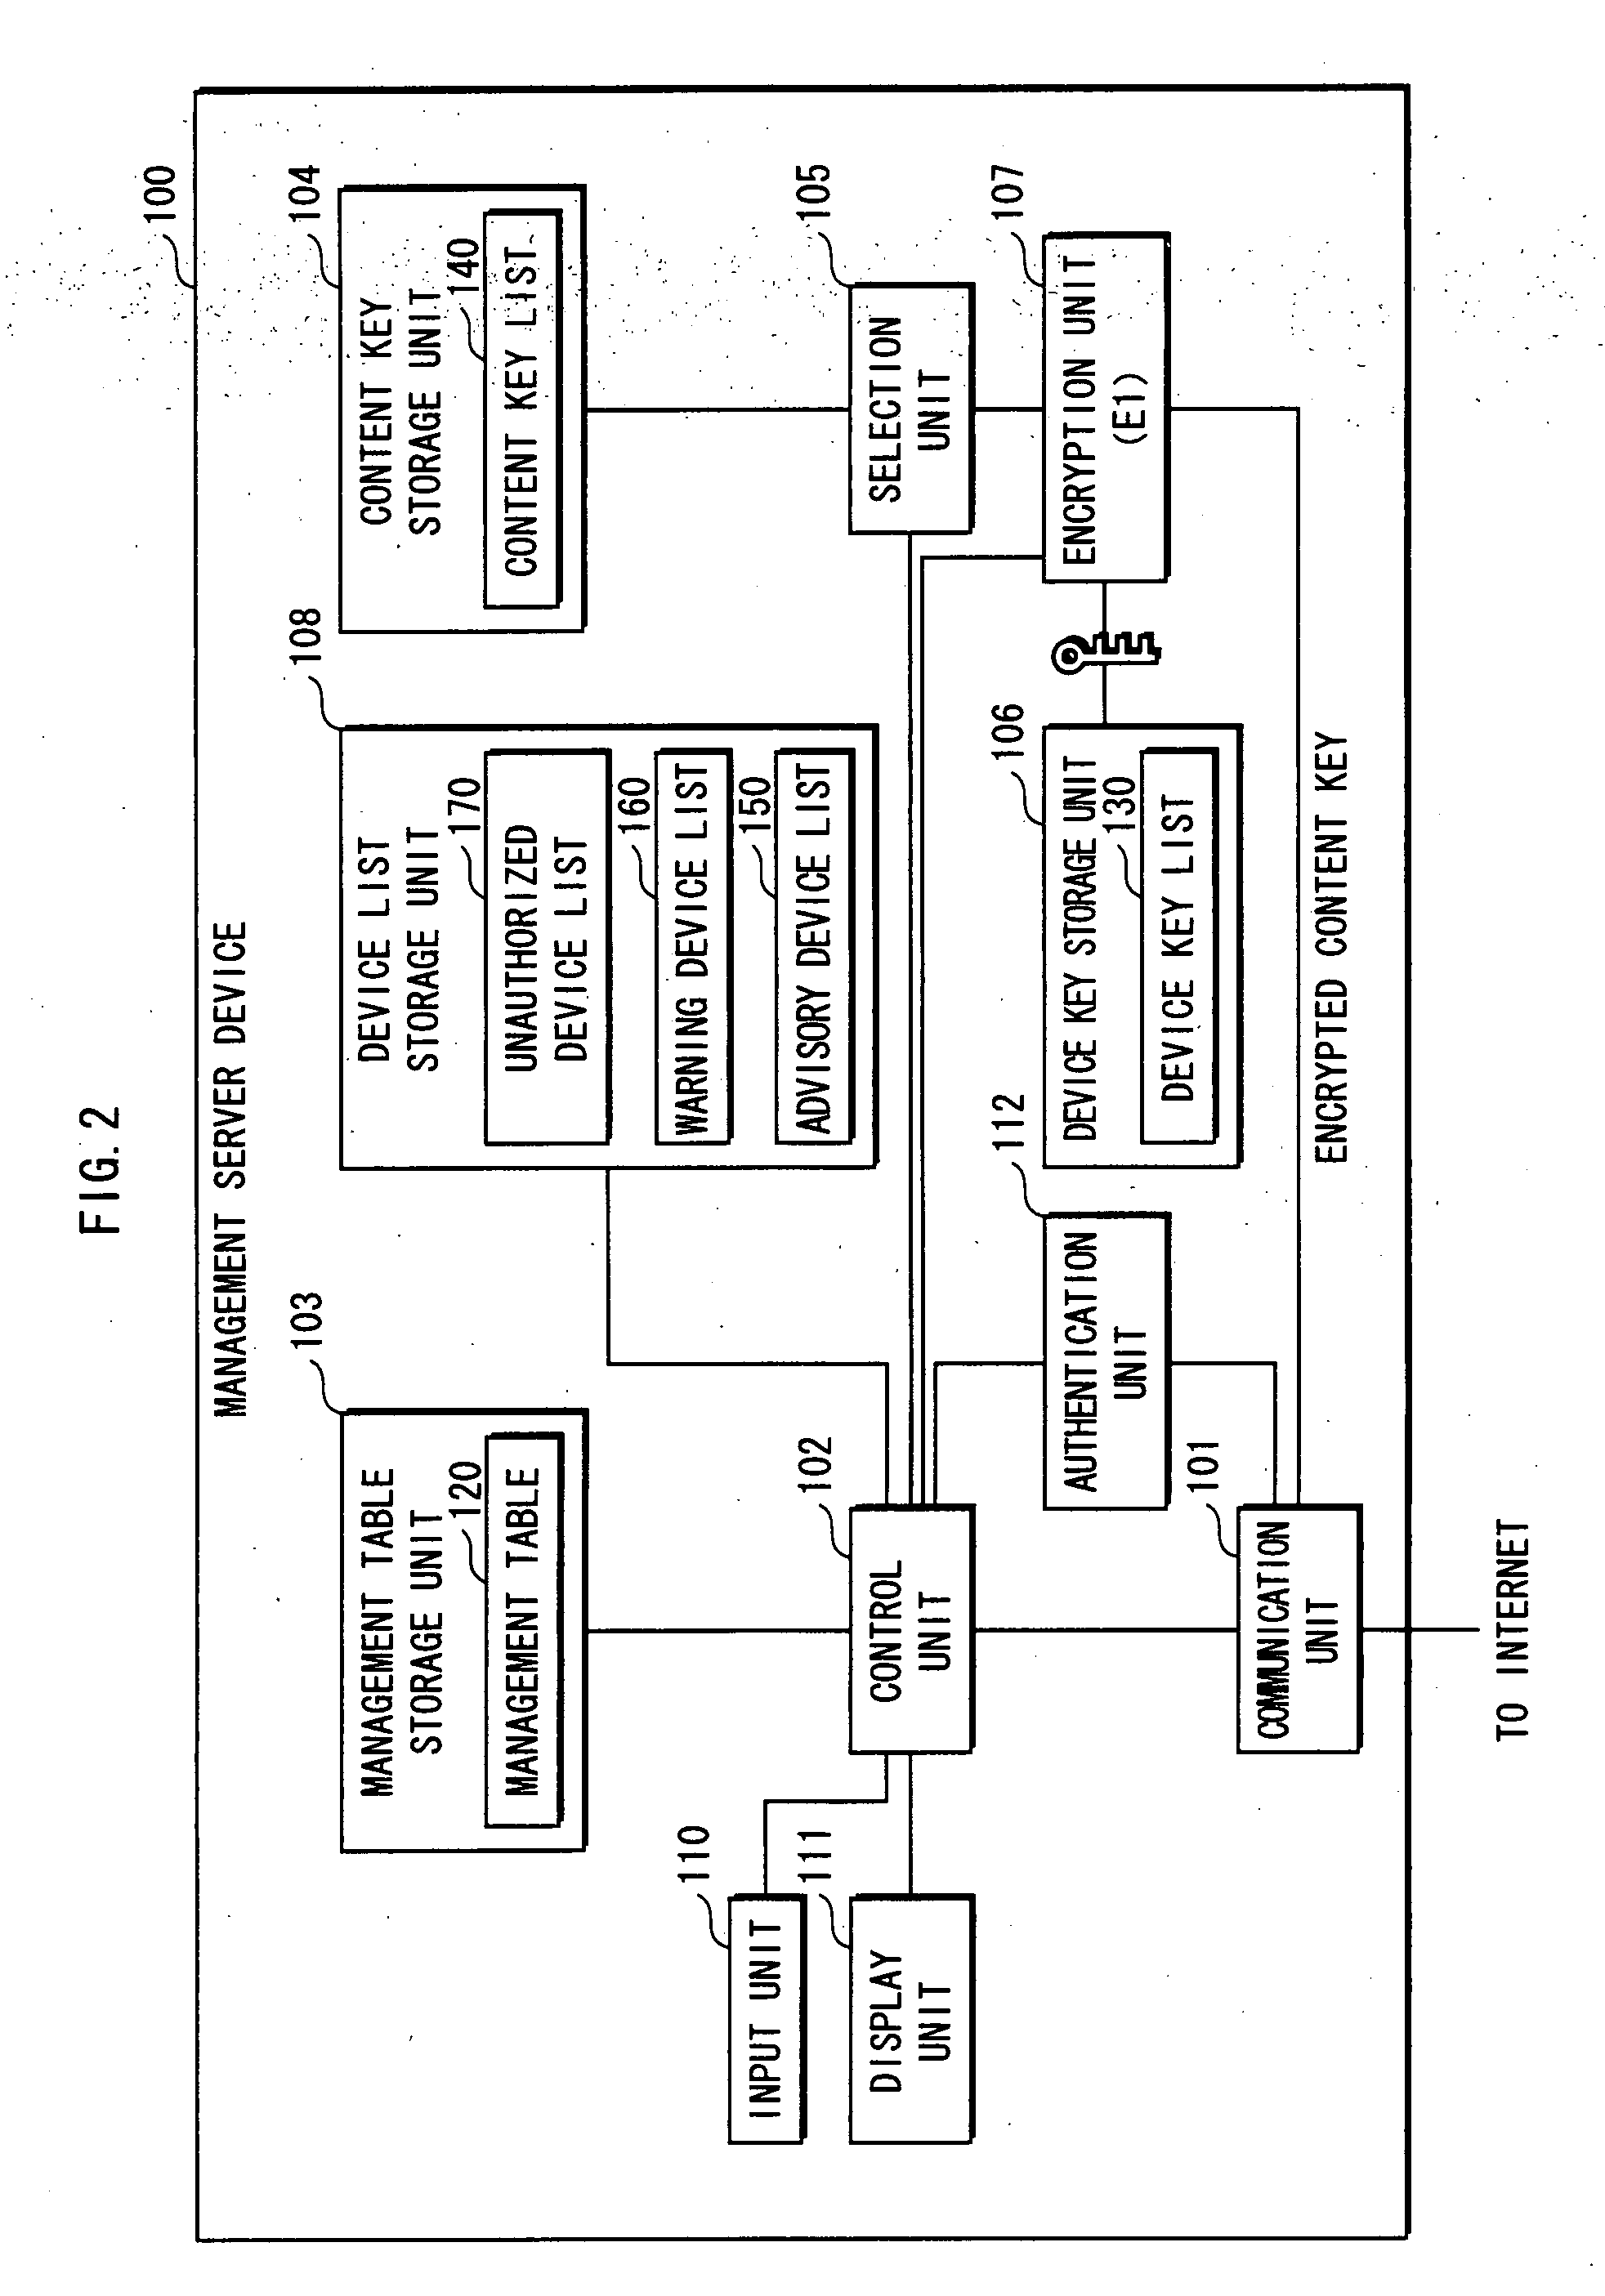 Unauthorized Device Detection Device And Unauthorized Device Detection System